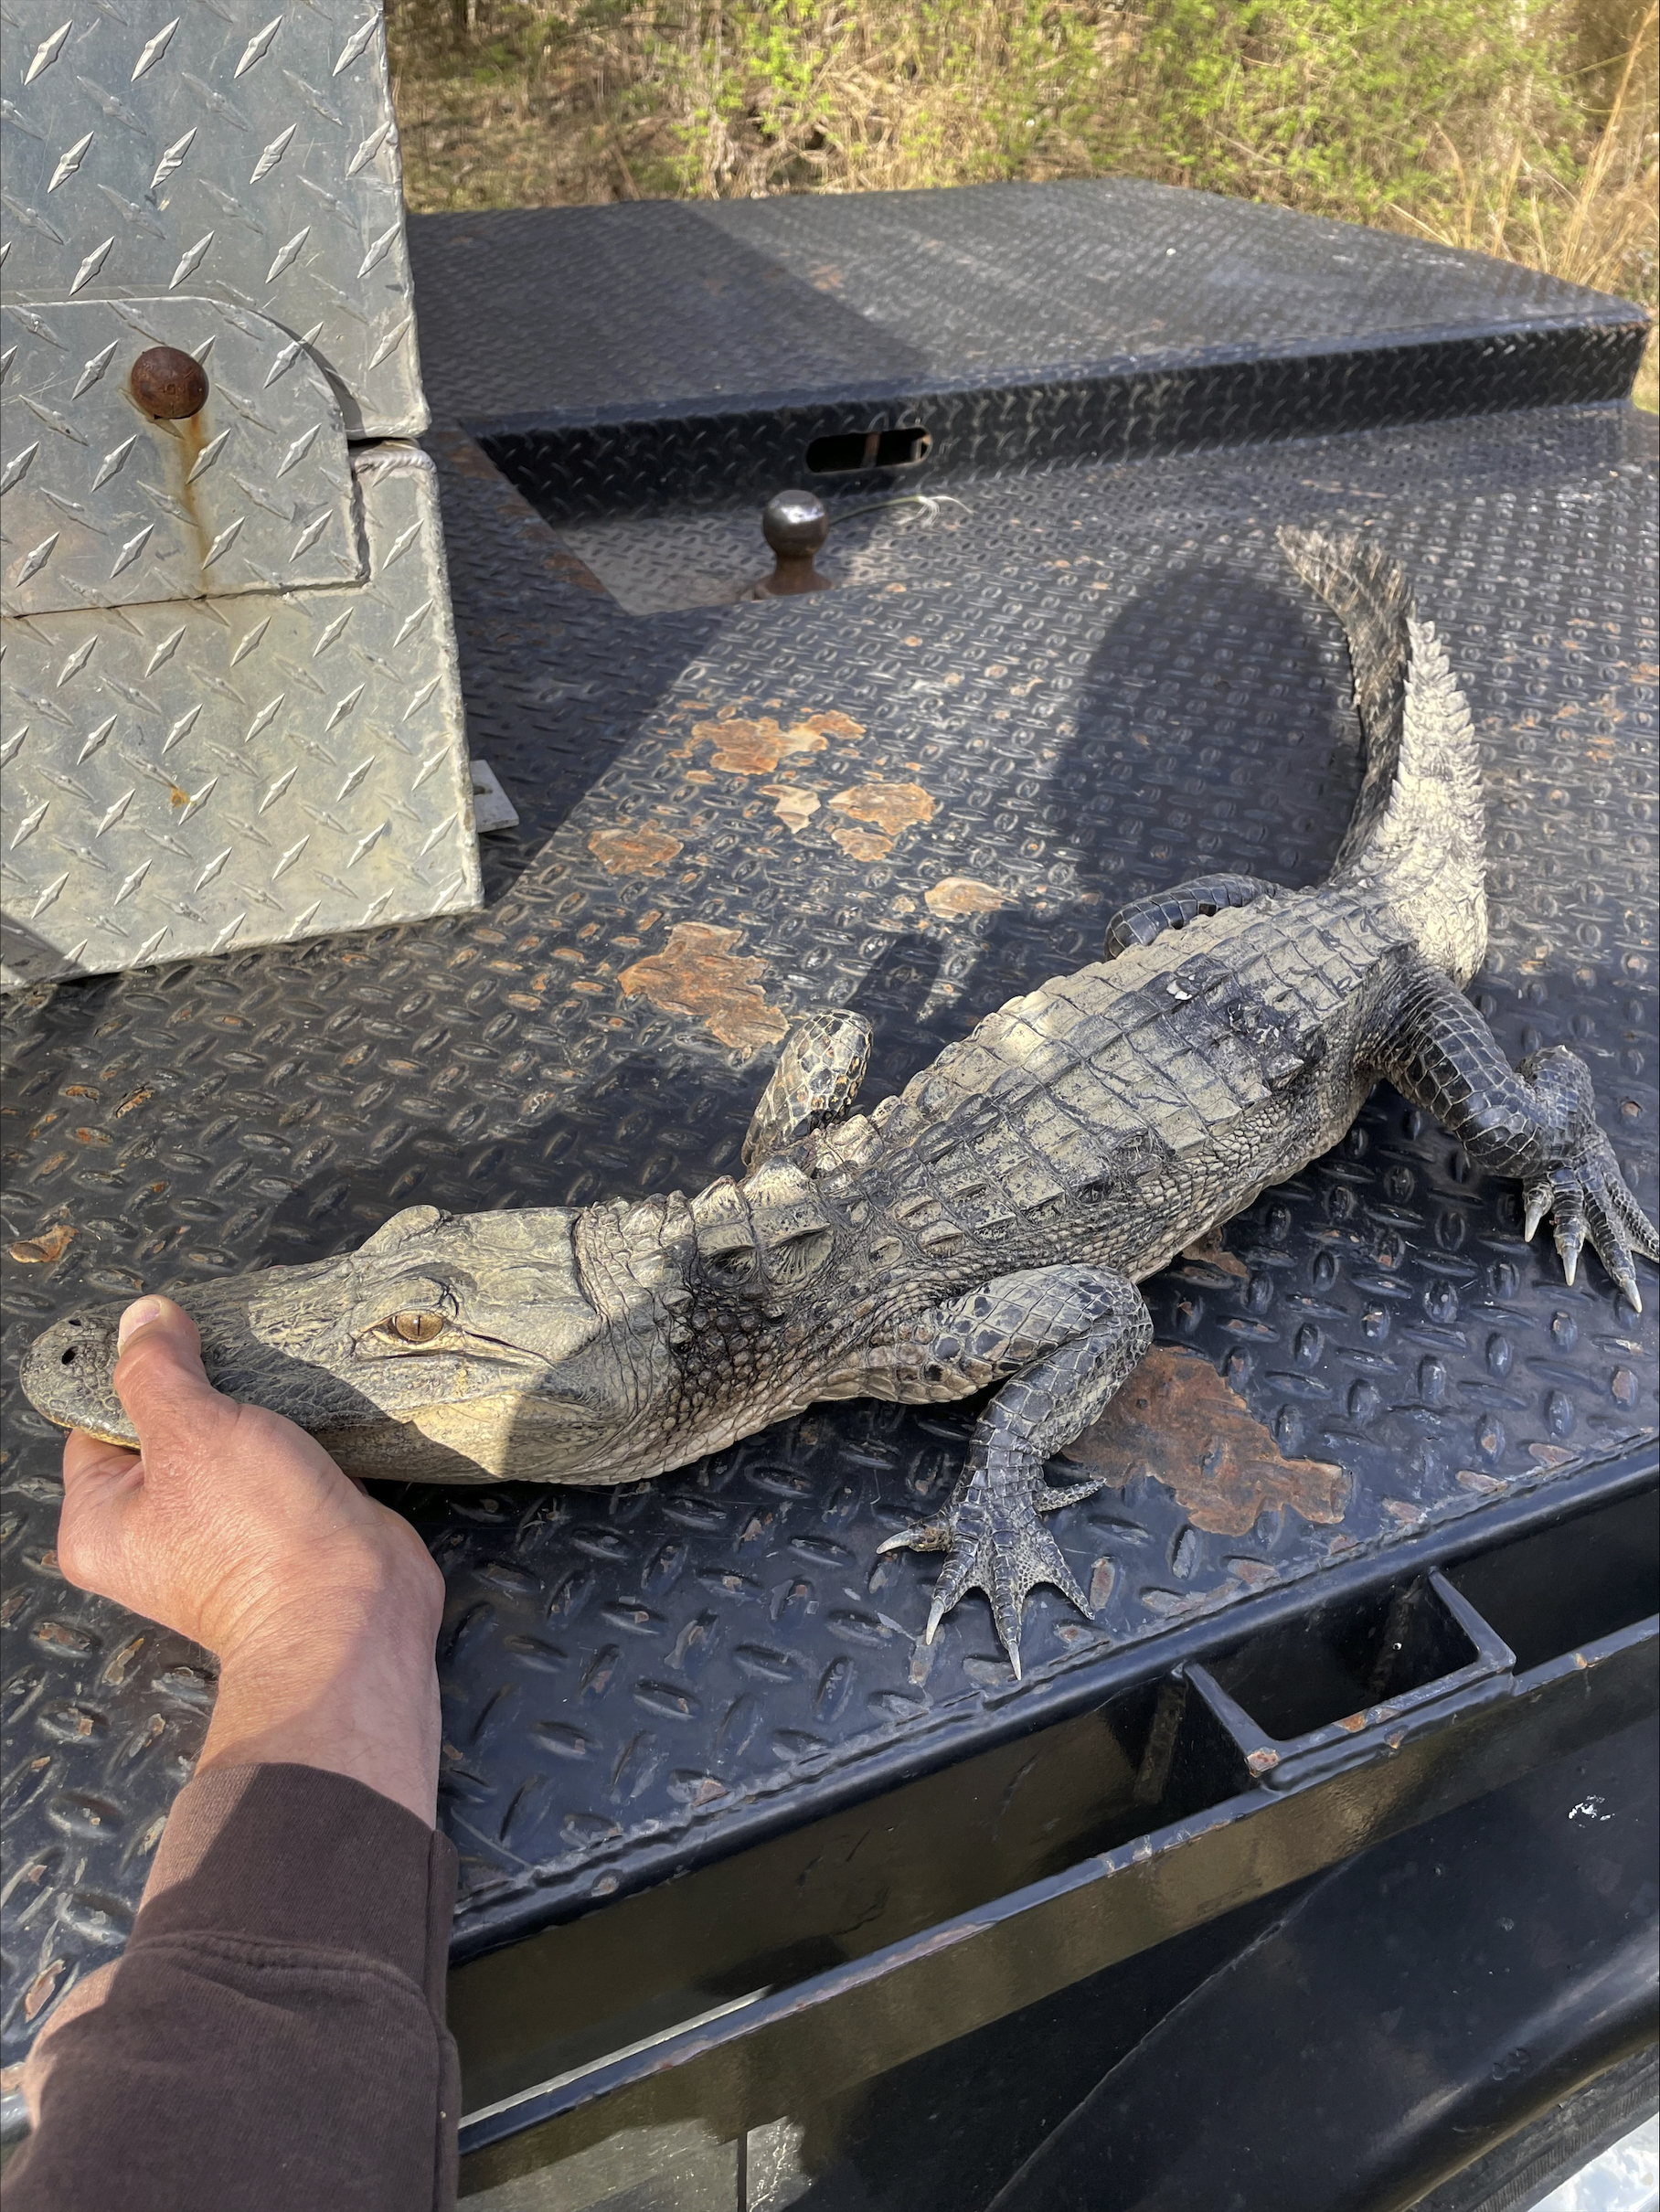 In this photo provided by the Tennessee Wildlife Resources Agency, an alligator was caught by an angler in Norris Lake in Union County, Tenn., on Monday, March 18, 2024. TWRA communications coordinator Matthew Cameron said the origin of the alligator was unclear, but it appeared that the alligator had been illegally held in captivity and possibly released into the lake. (Rick Roberts/Tennessee Wildlife Resources Agency via AP)